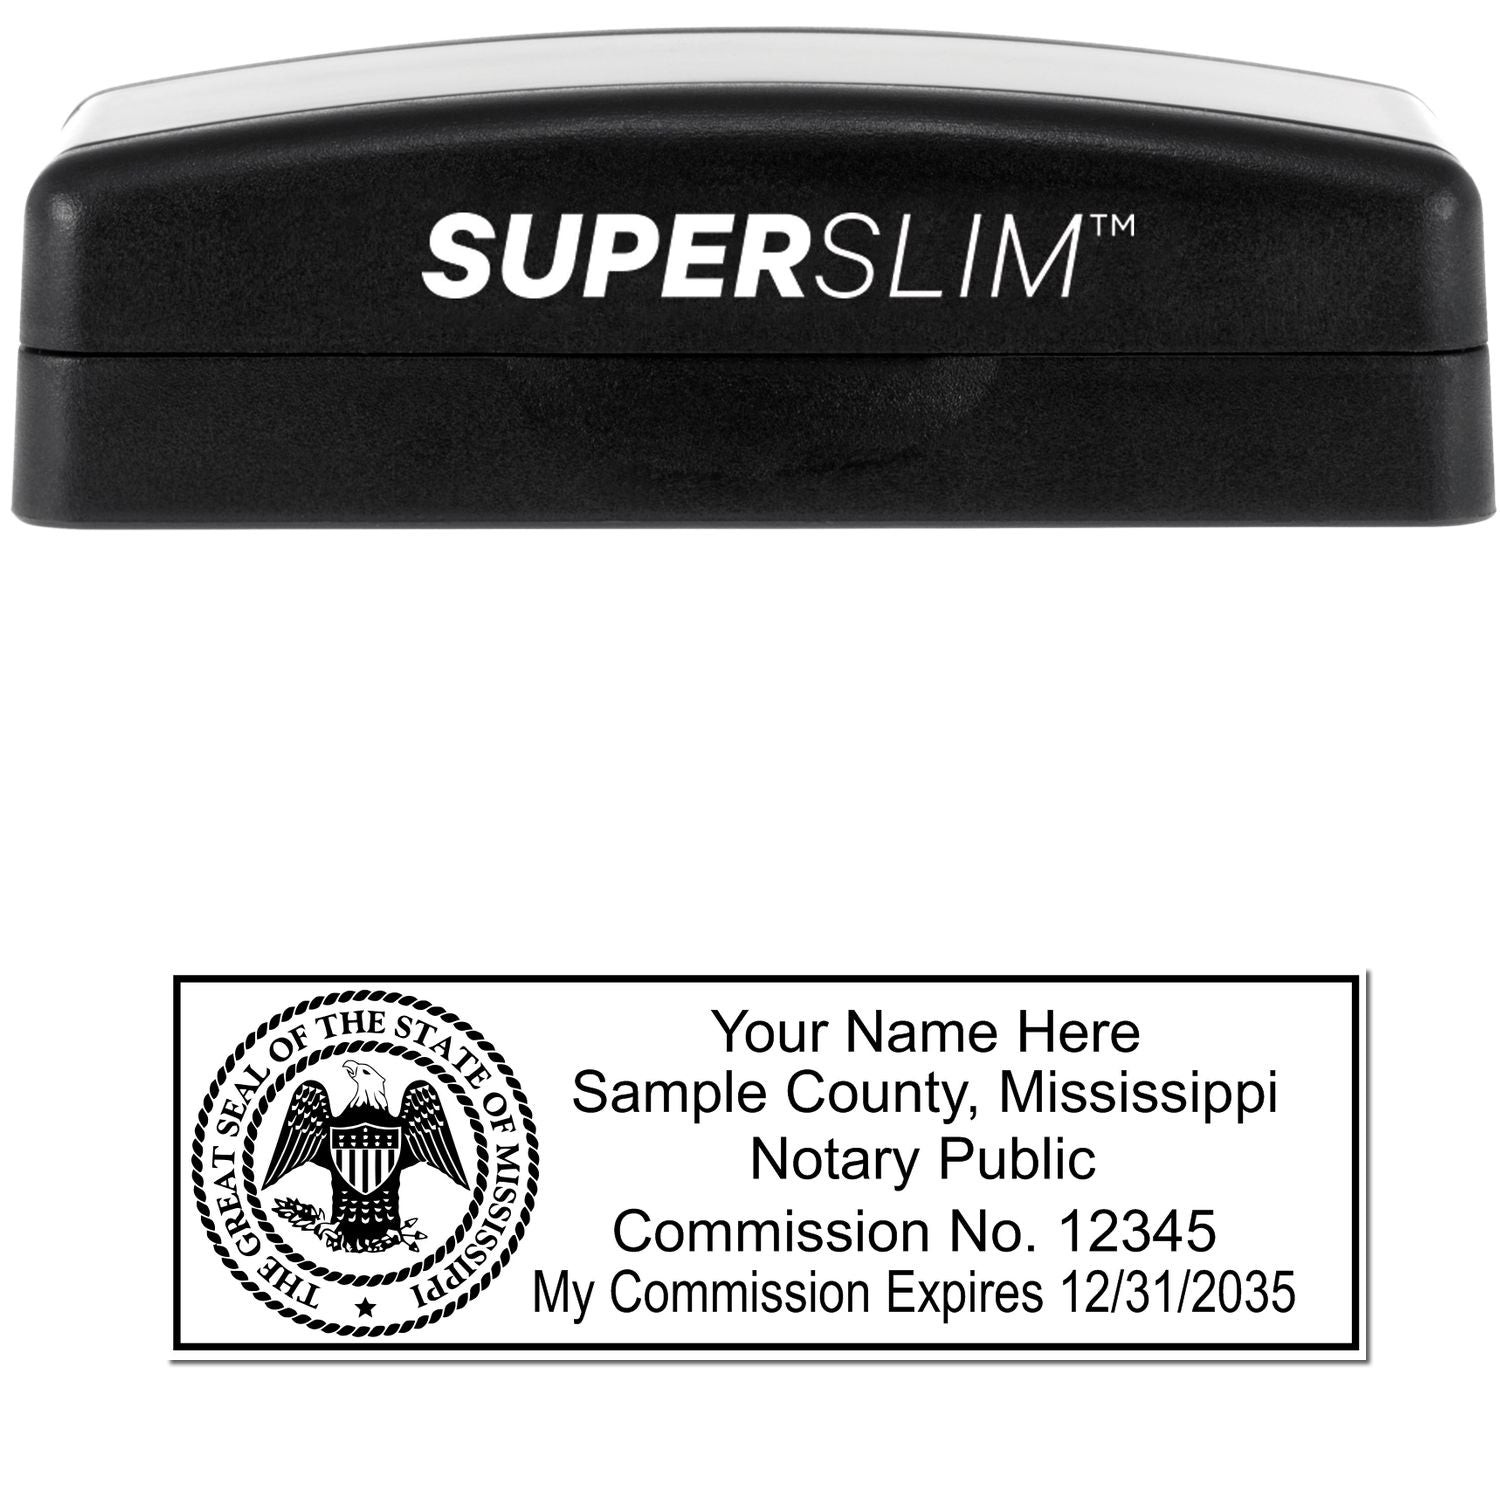 The main image for the Super Slim Mississippi Notary Public Stamp depicting a sample of the imprint and electronic files